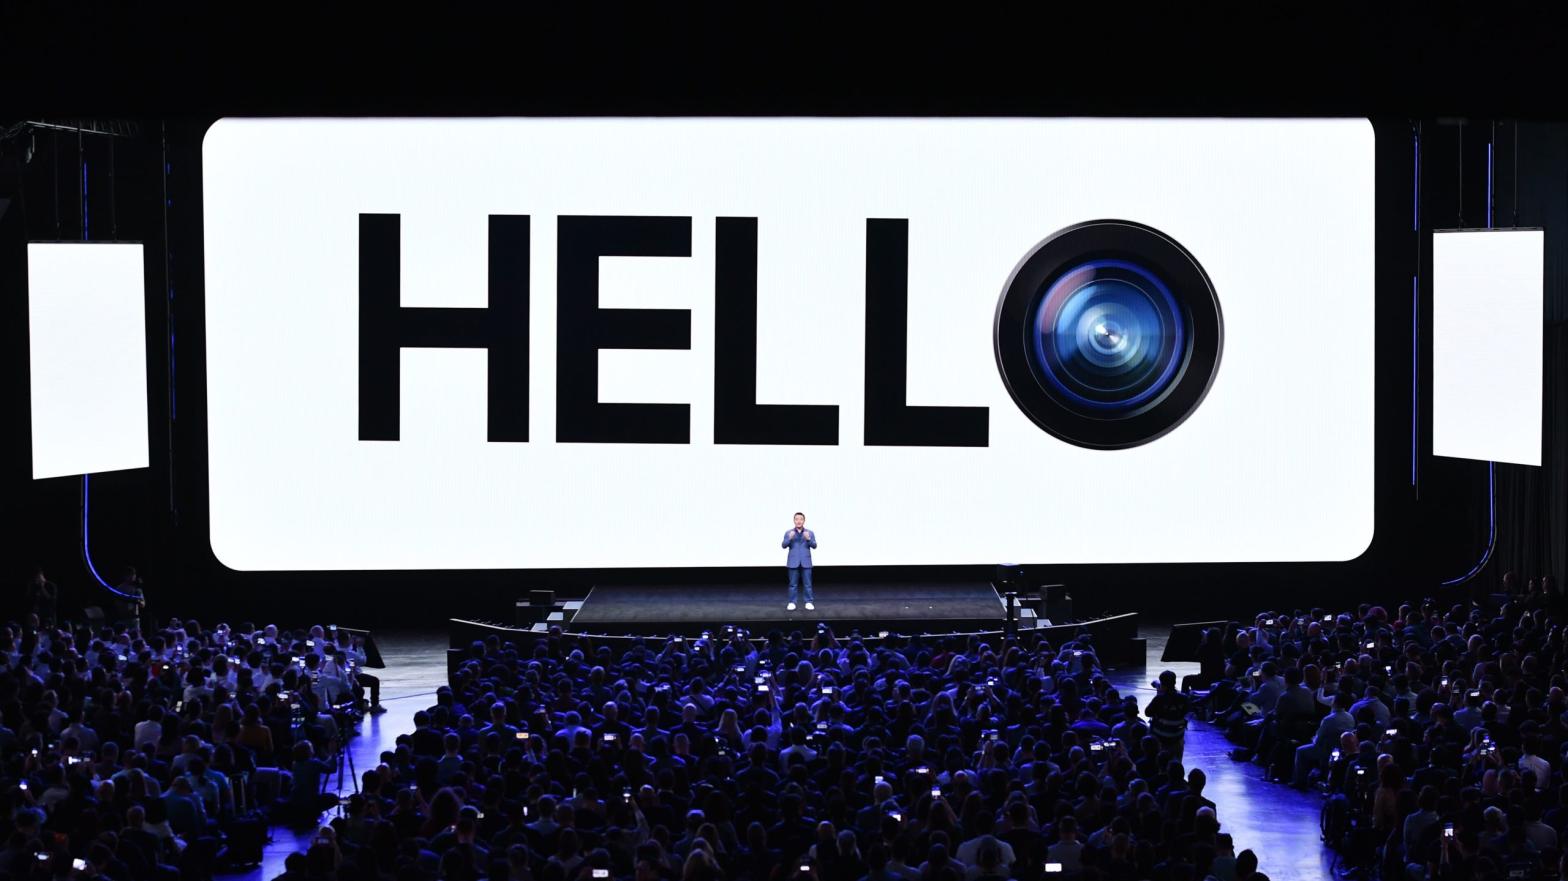 TM Roh, President and Head of Mobile Communications Business, speaks during the Samsung Galaxy Unpacked 2020 event in San Francisco, California on February 11, 2020. (Photo: Josh Edelson / AFP, Getty Images)